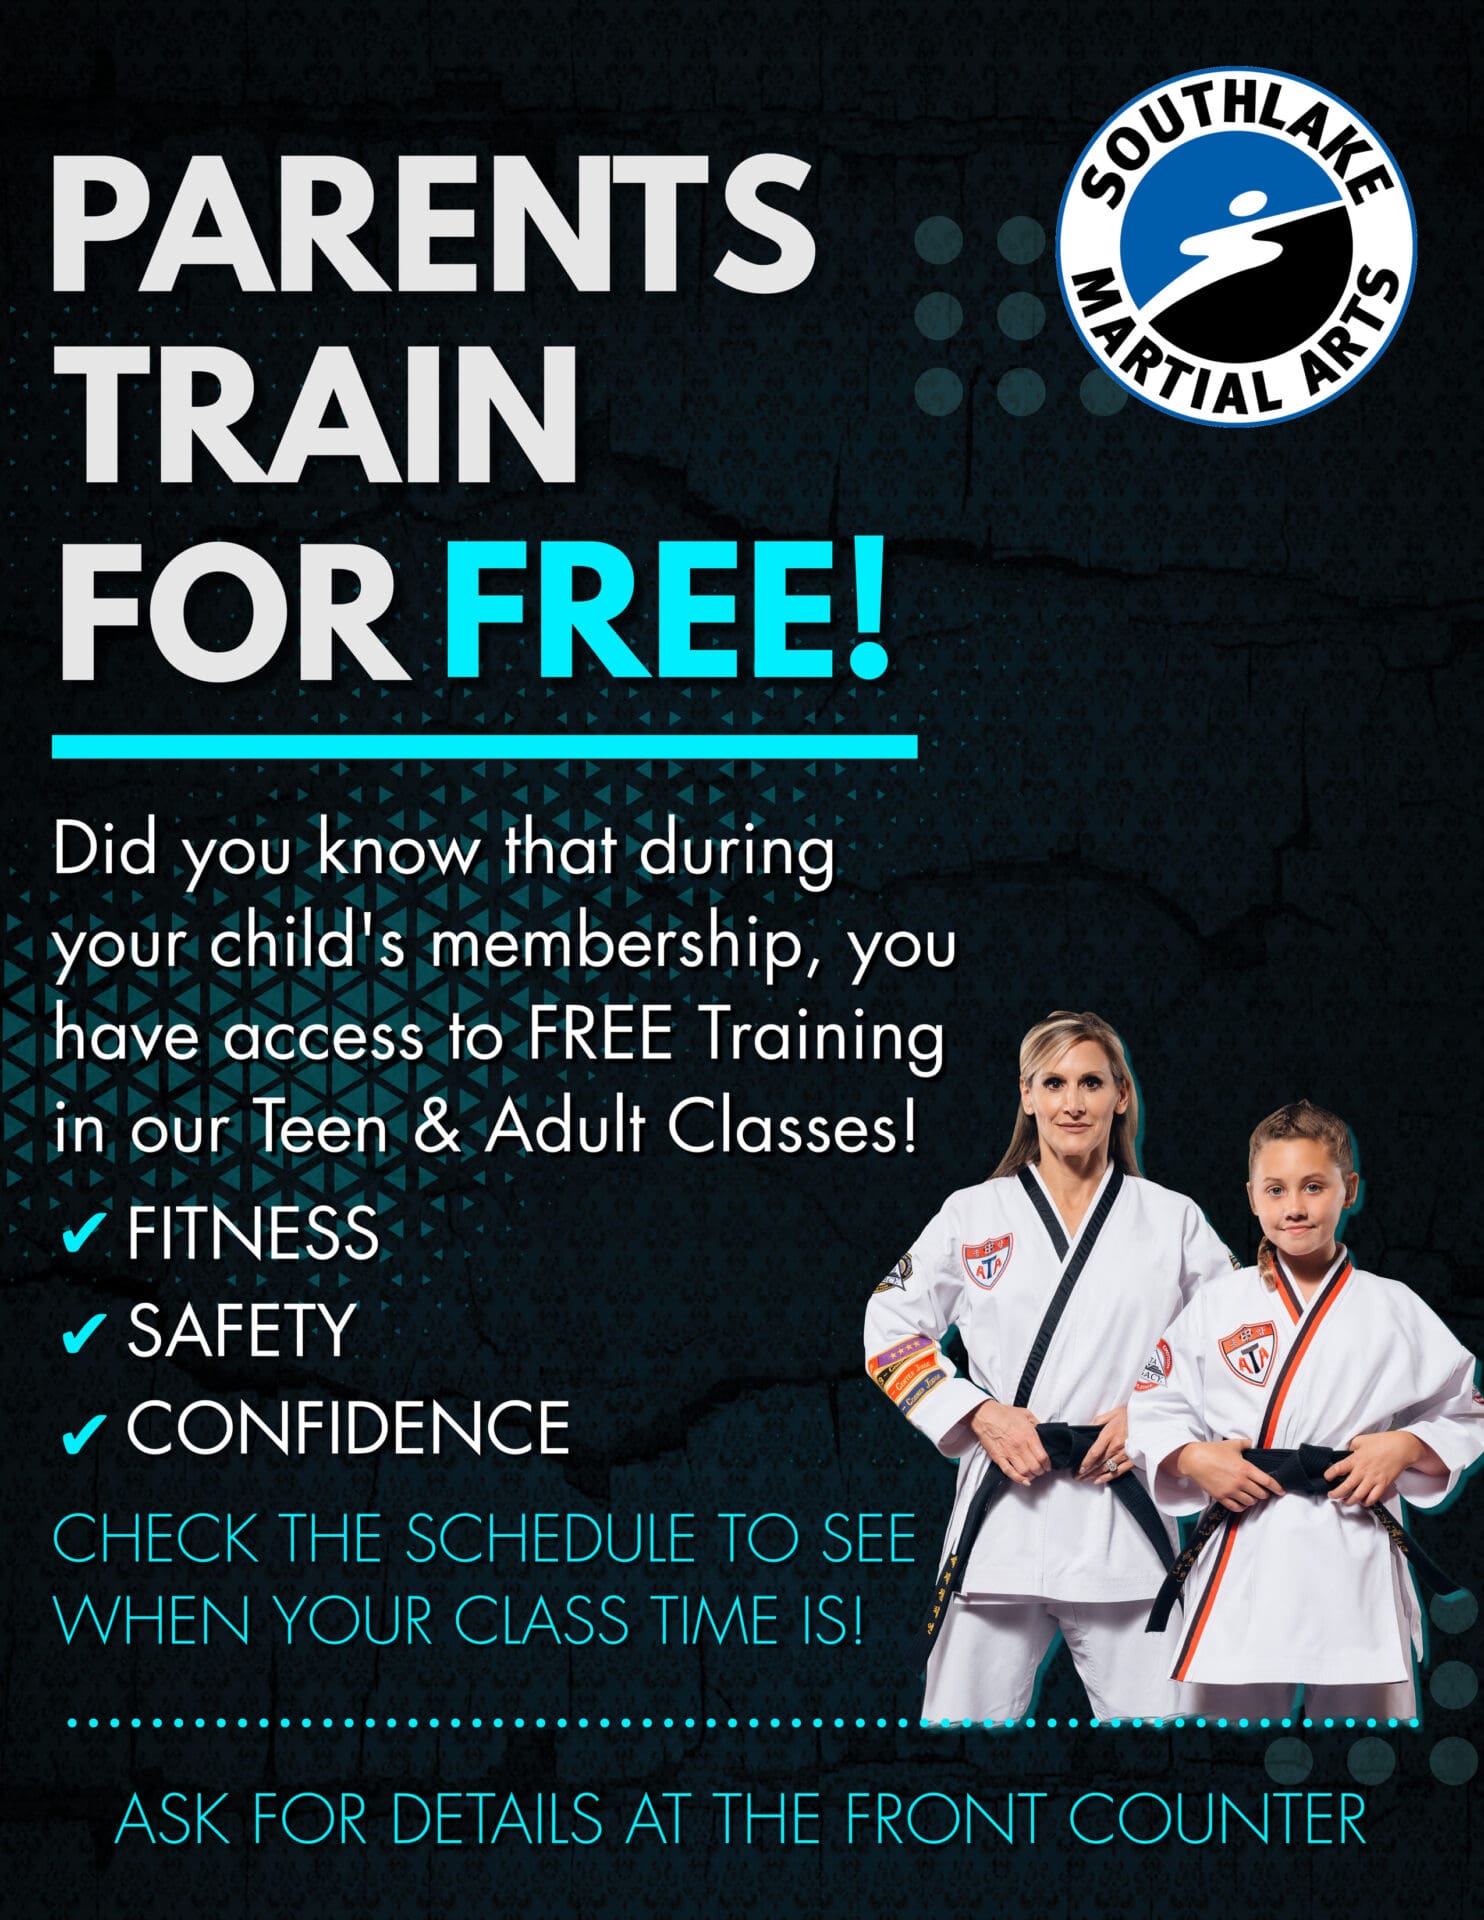 Parents Train For Free